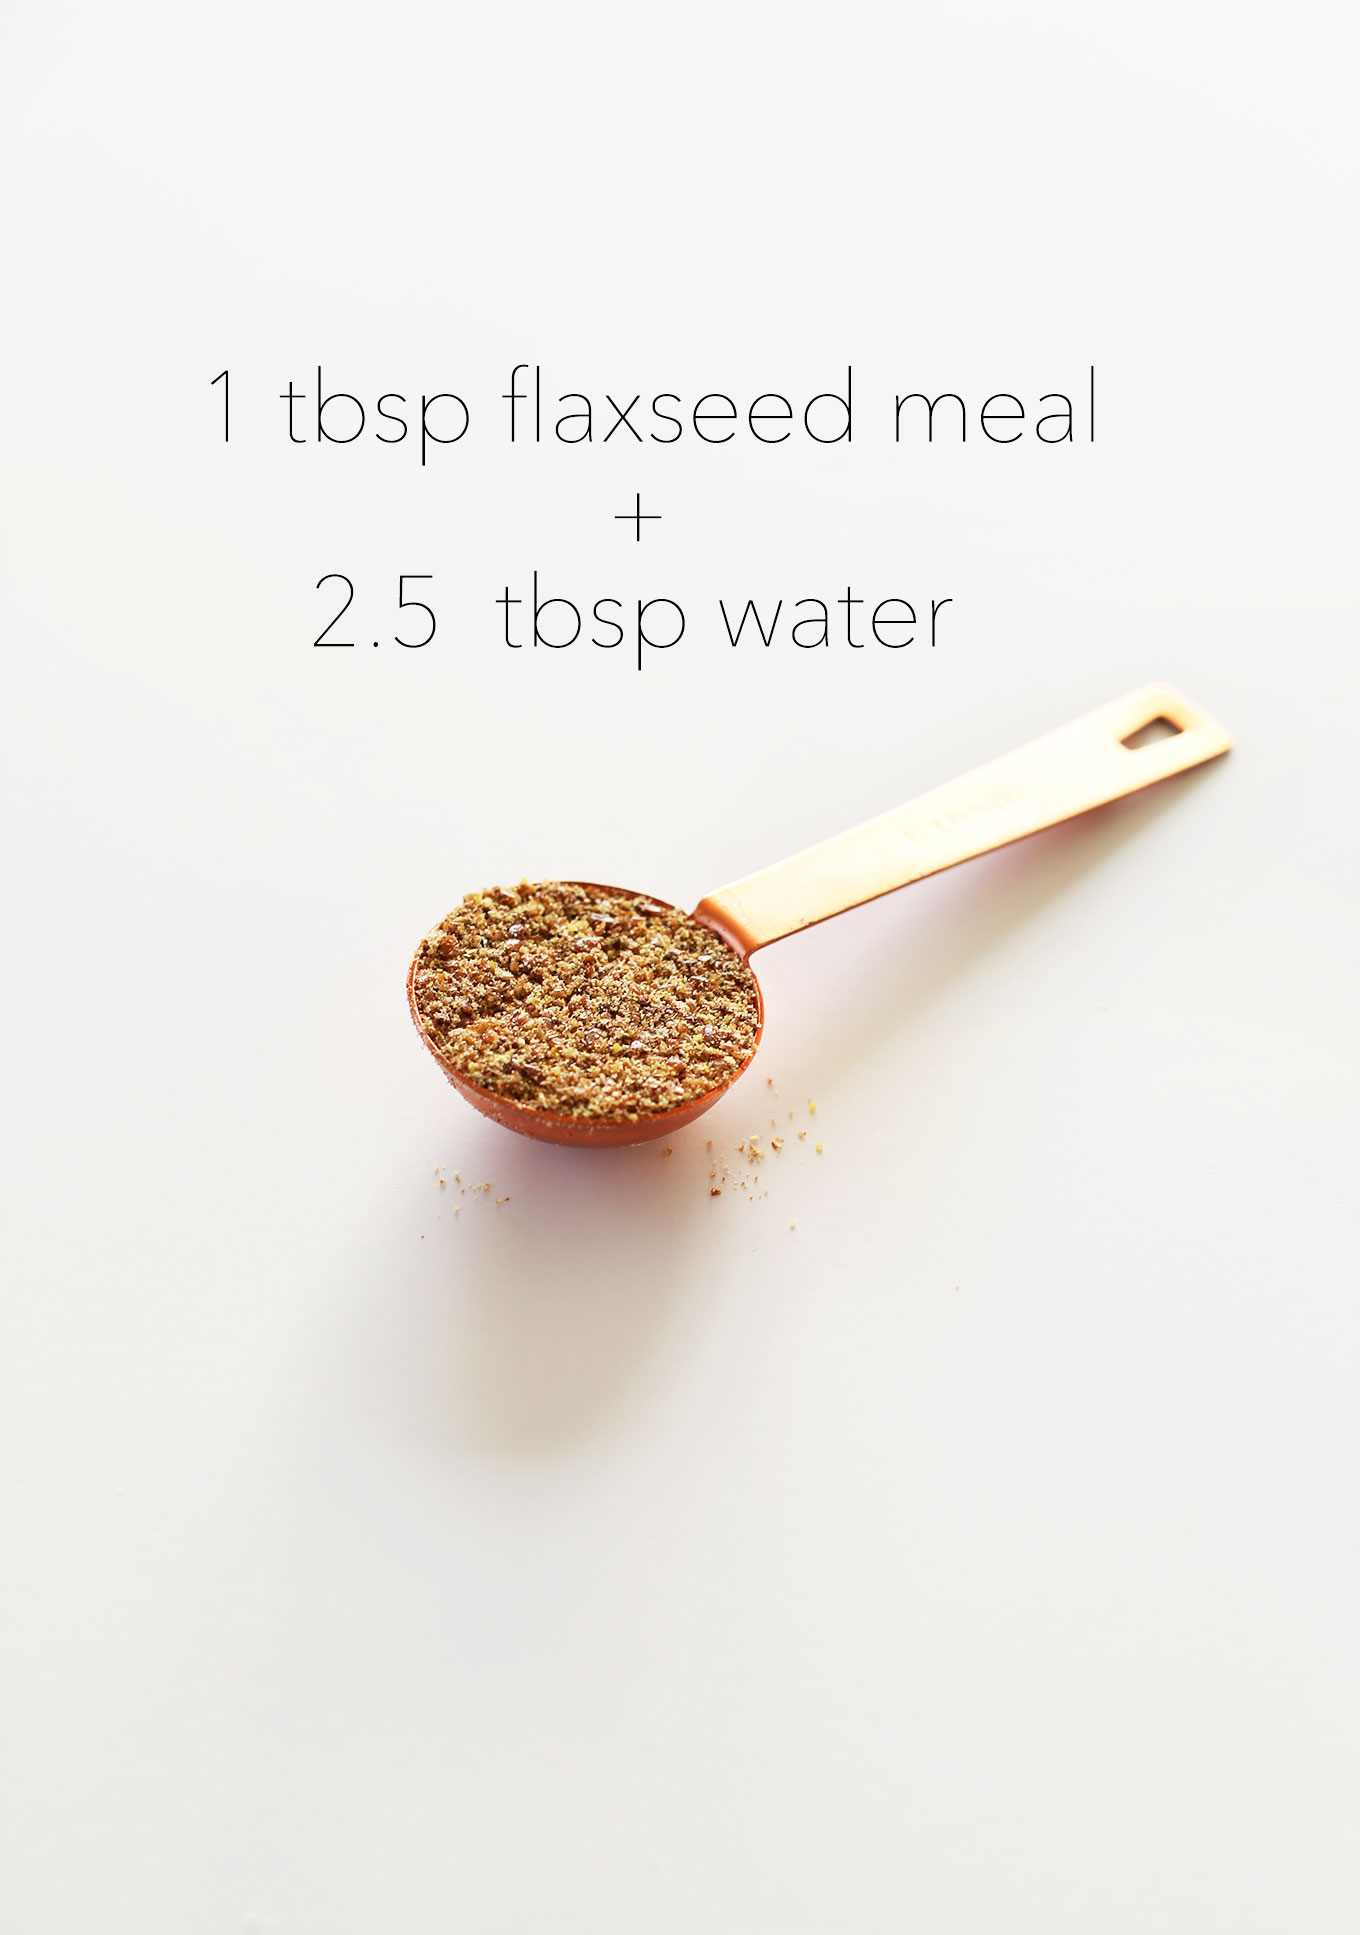 Measuring spoon filled with flaxseed meal for our How to Make a Flax Egg tutorial